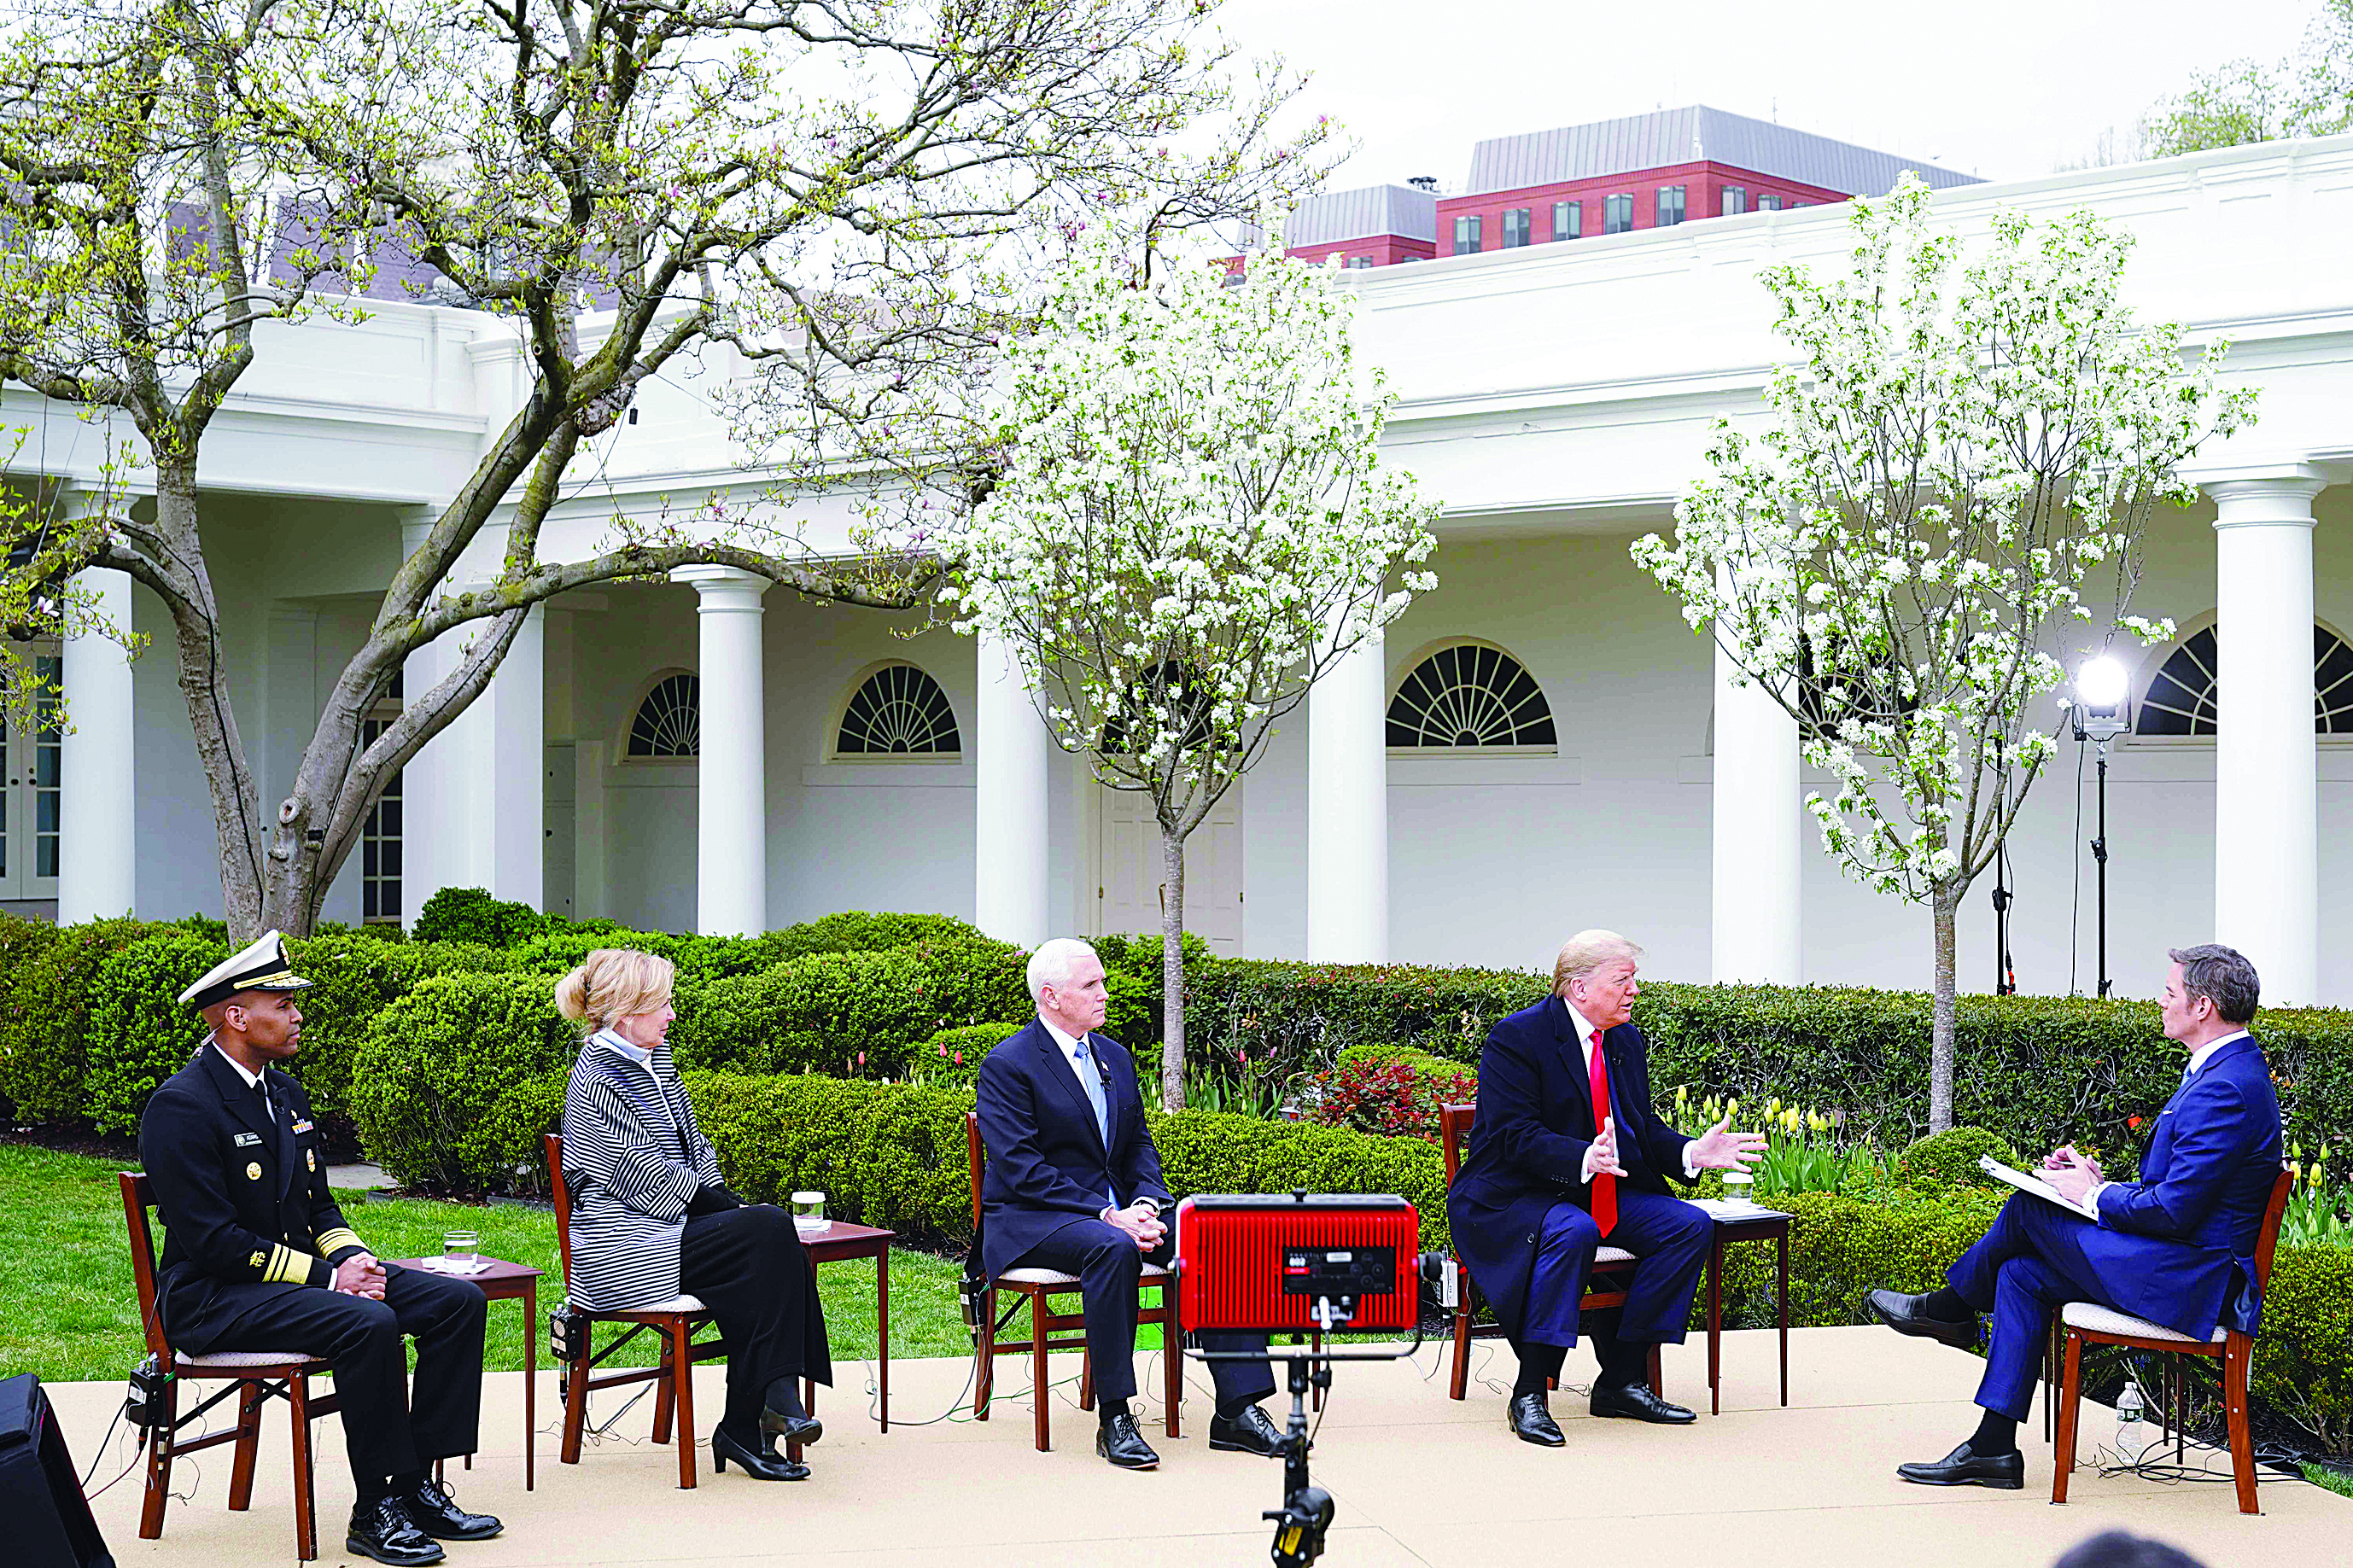 (L-R) US Surgeon General Jerome Adams, Response coordinator for White House Coronavirus Task Force Deborah Birx, US Vice President Mike Pence and President Donald Trump take part in a Fox News virtual town hall meeting with anchor Bill Hemmer, from the Rose Garden of the White House in Washington, DC, on March 24, 2020. (Photo by MANDEL NGAN / AFP)